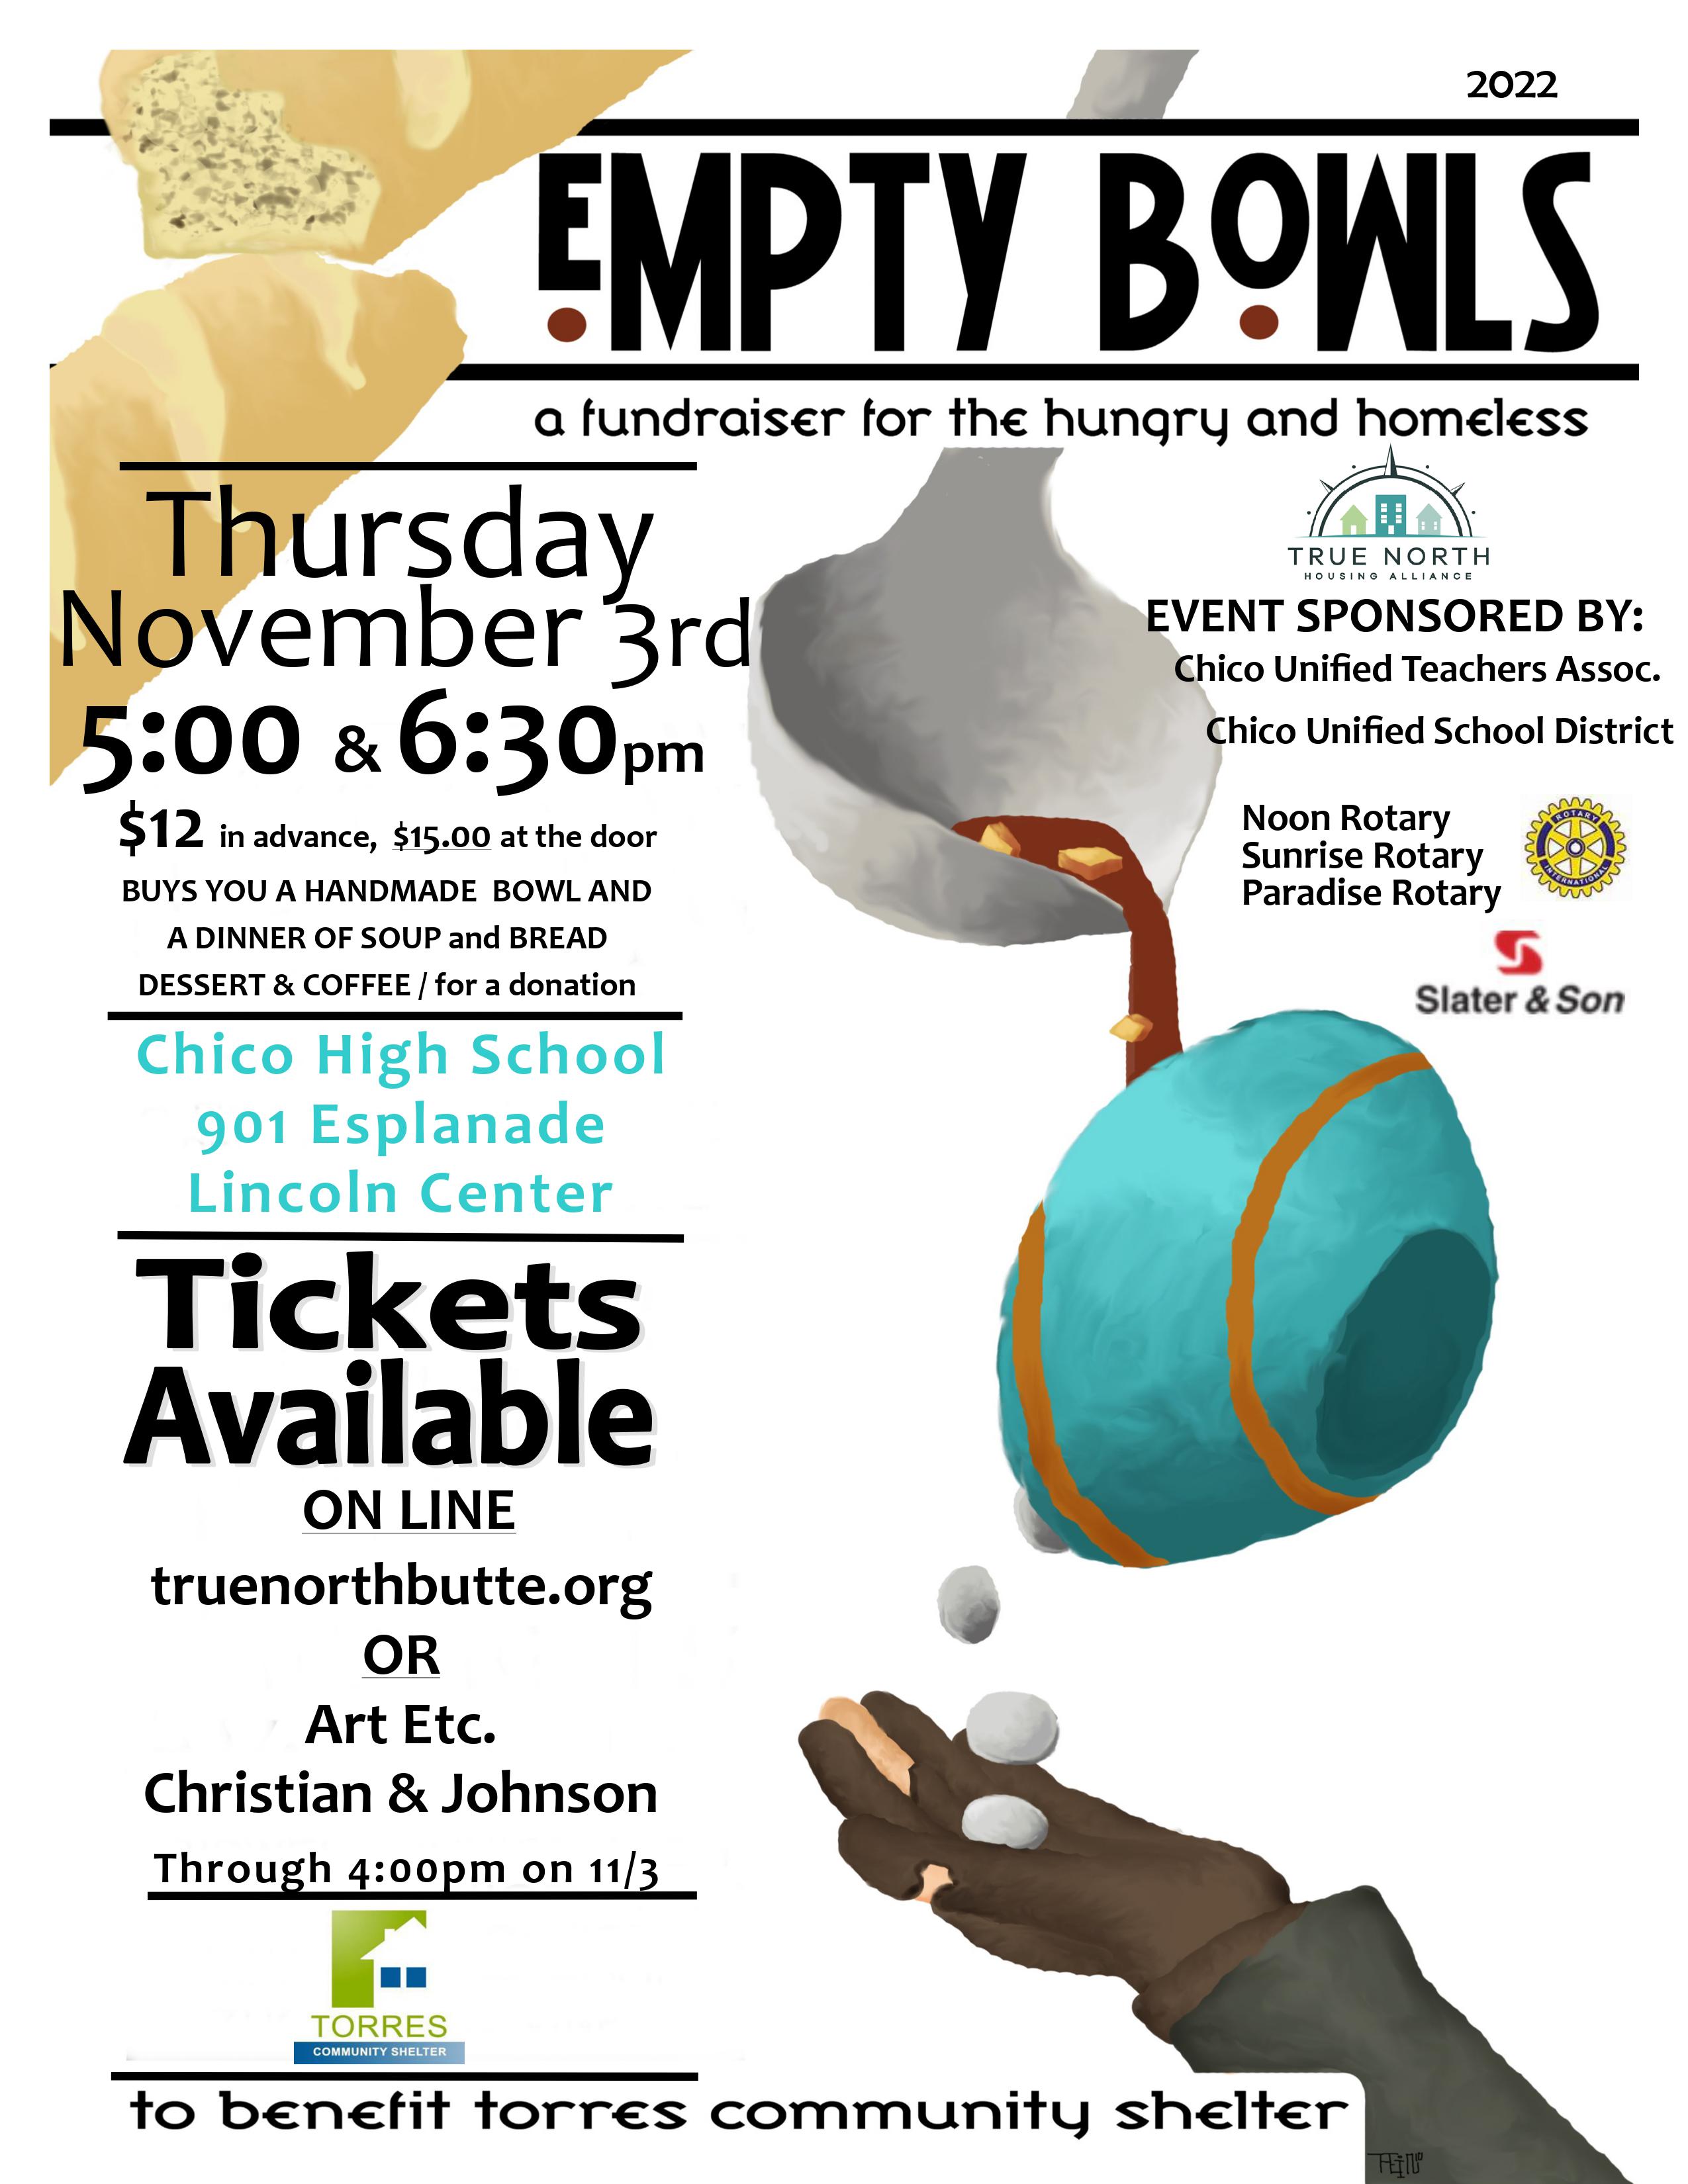 15th Annual Empty Bowls Fundraiser At Amherst Survival Center - Amherst Indy